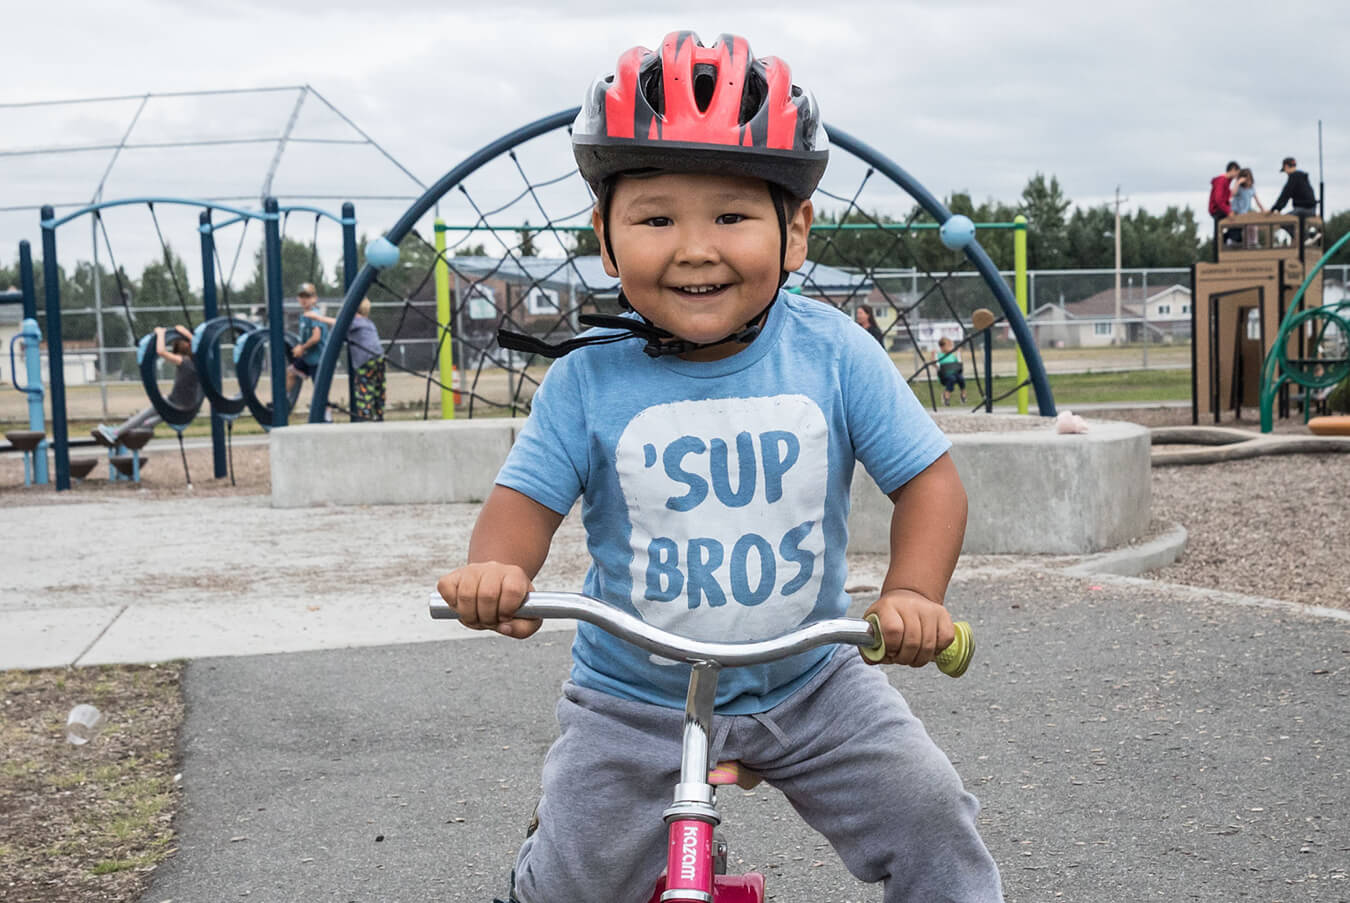 Young boy in blue shirt wearing a red helmet at playground